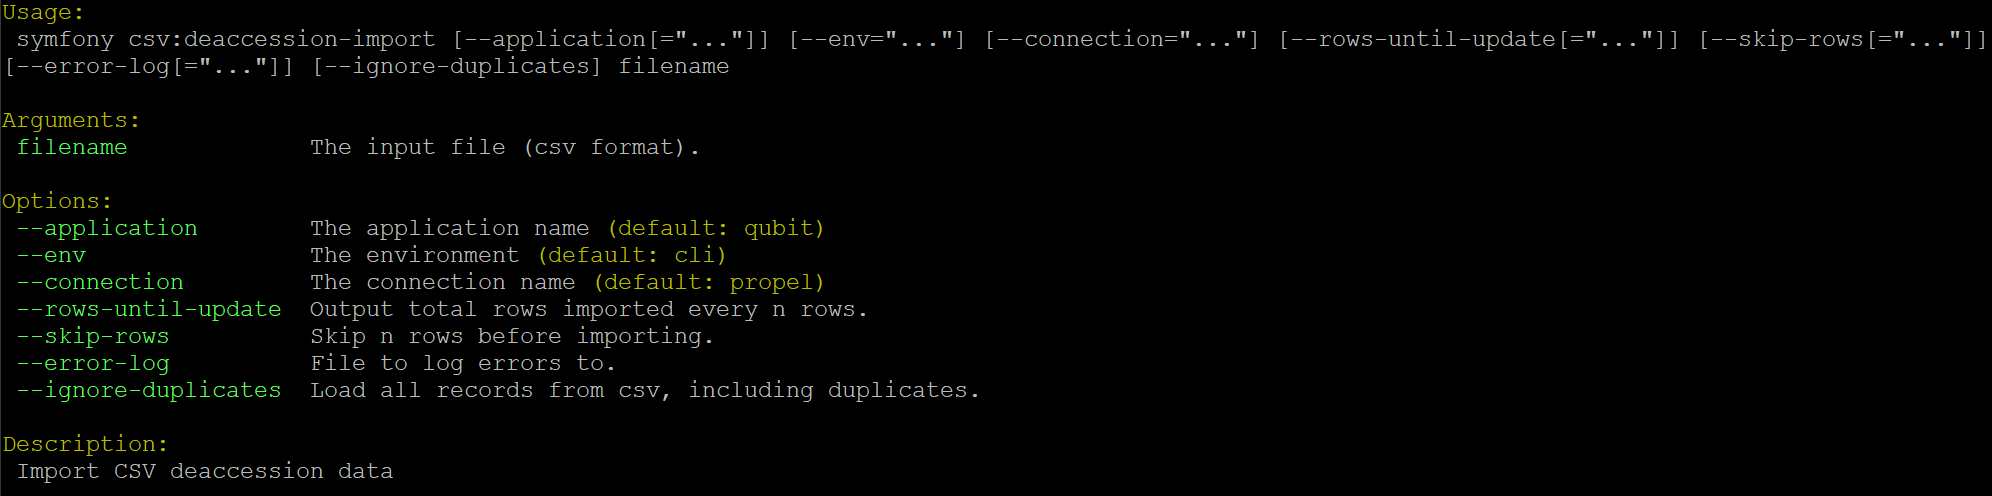 An image of the command-line options for deaccession record imports